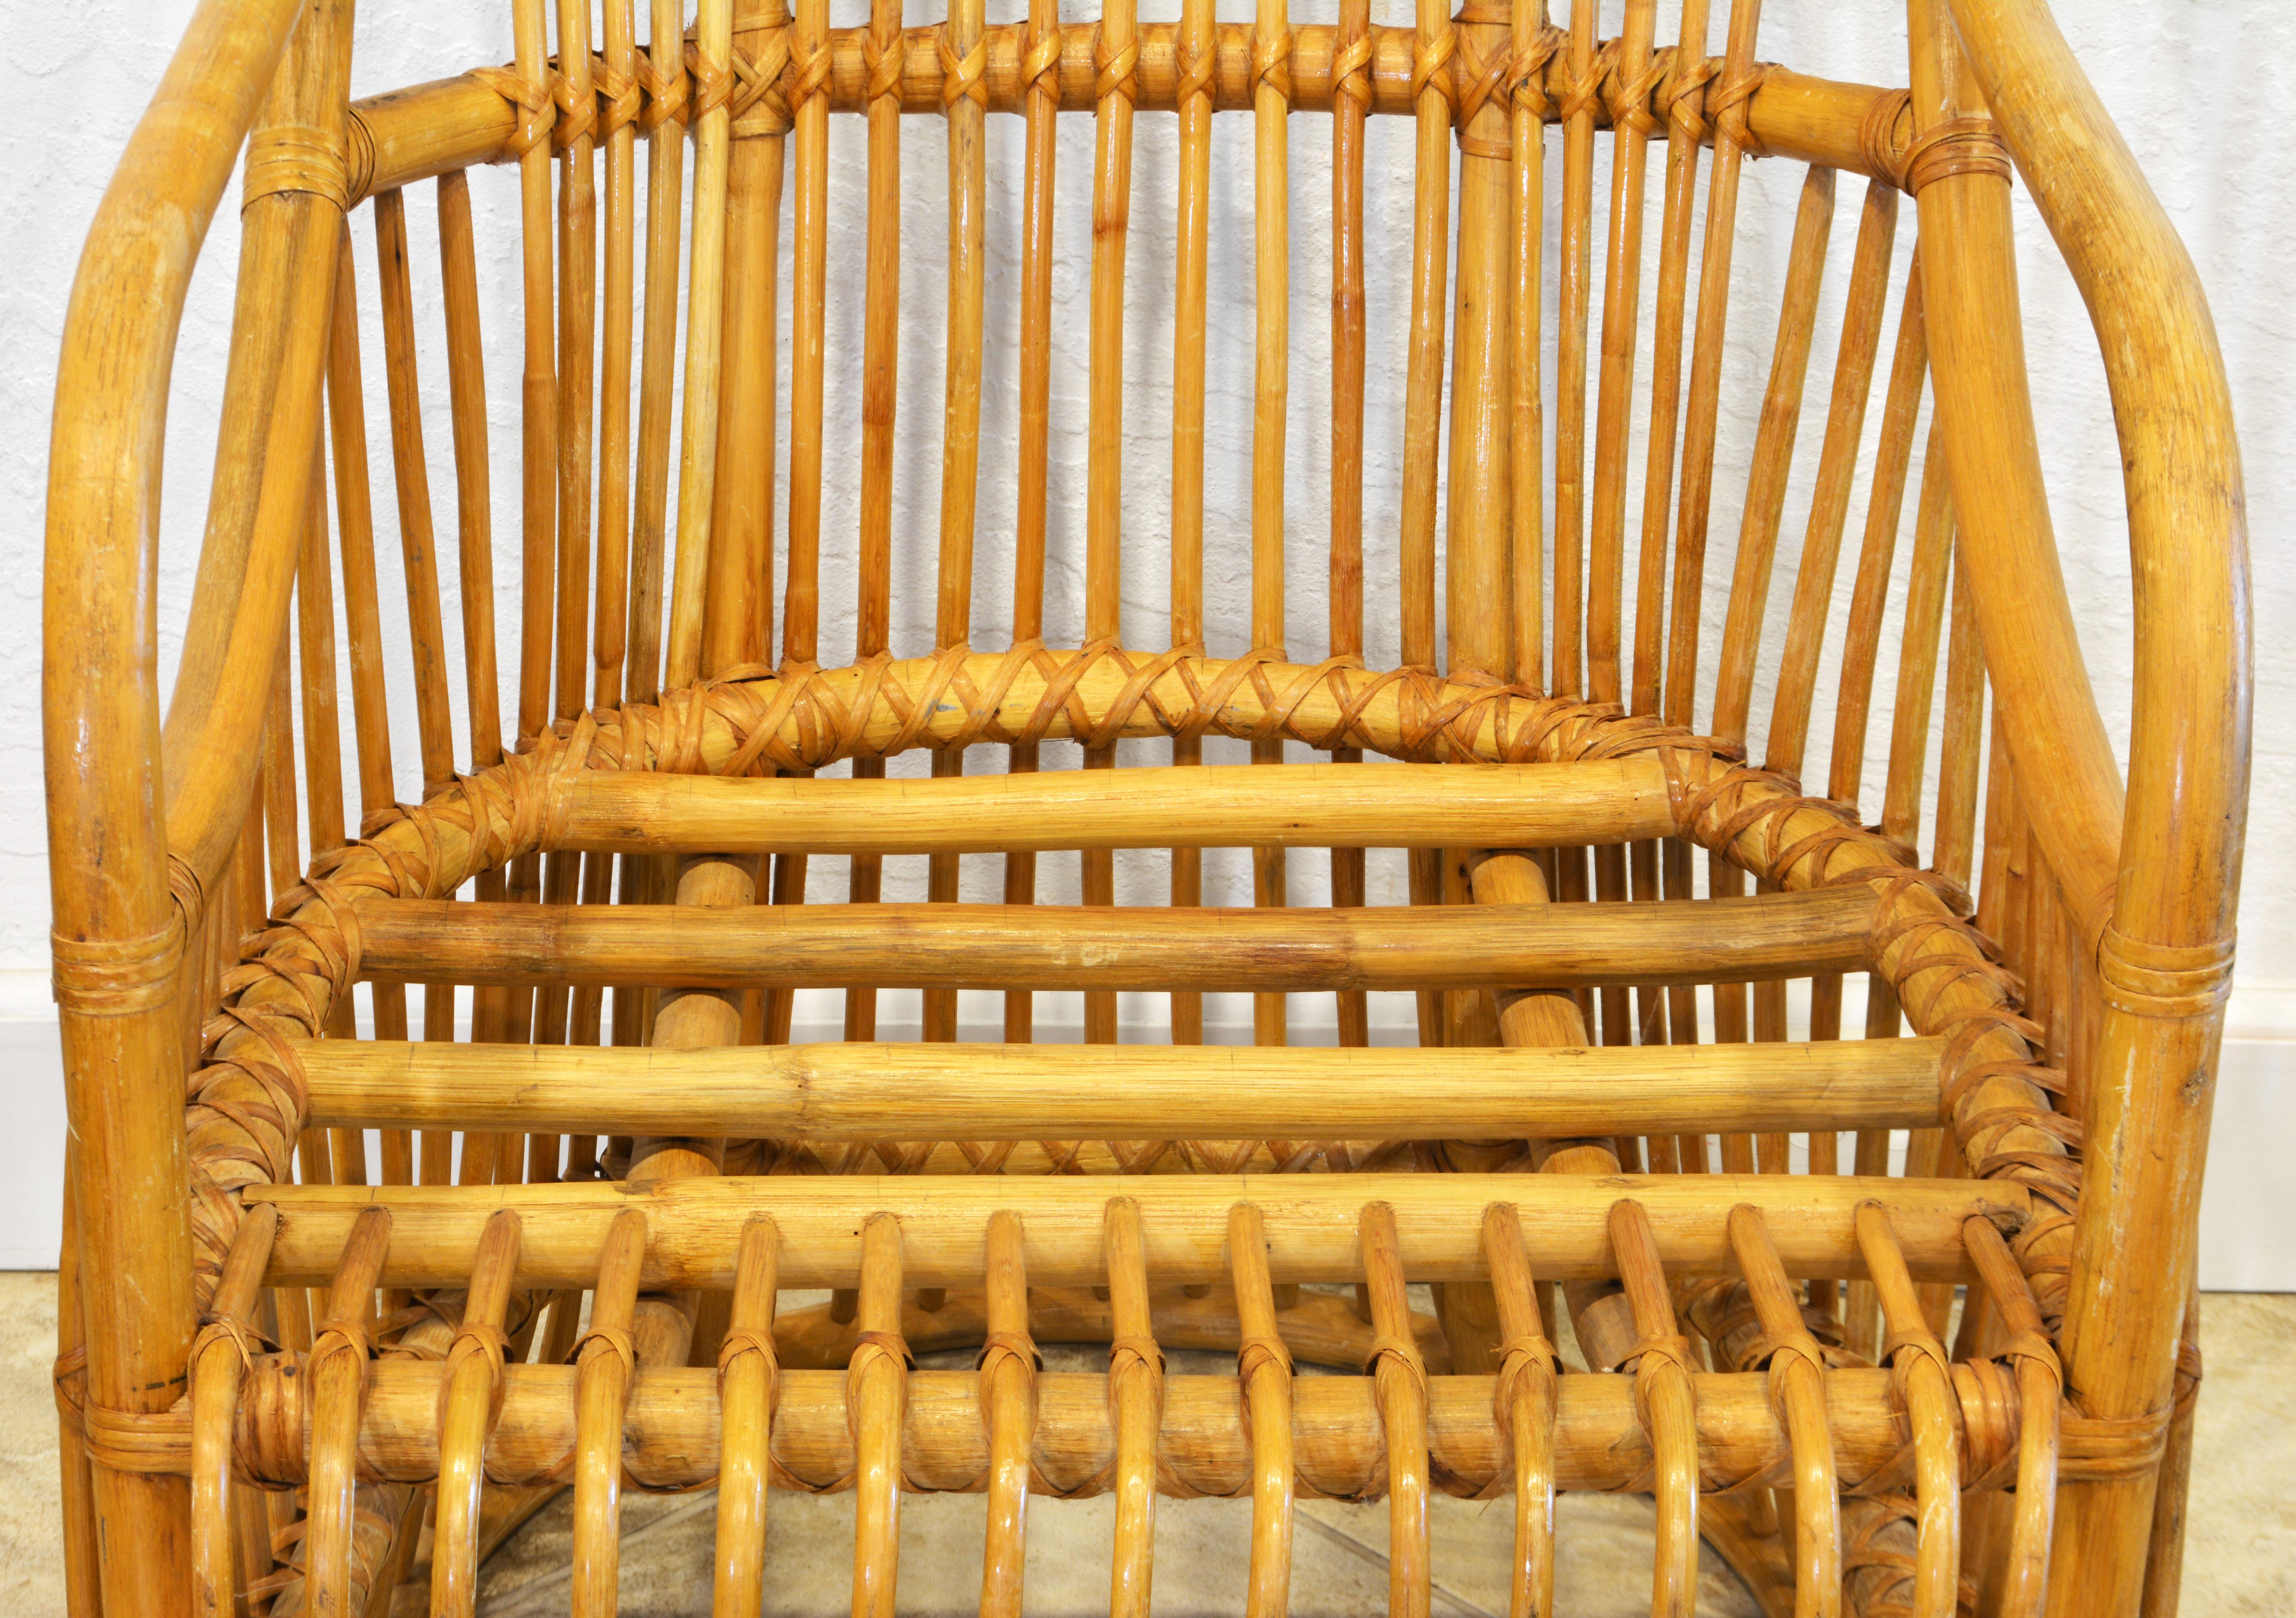 Fabric Sculptural Organic Form Bamboo and Rattan Canope Chair Manner of Franco Albini